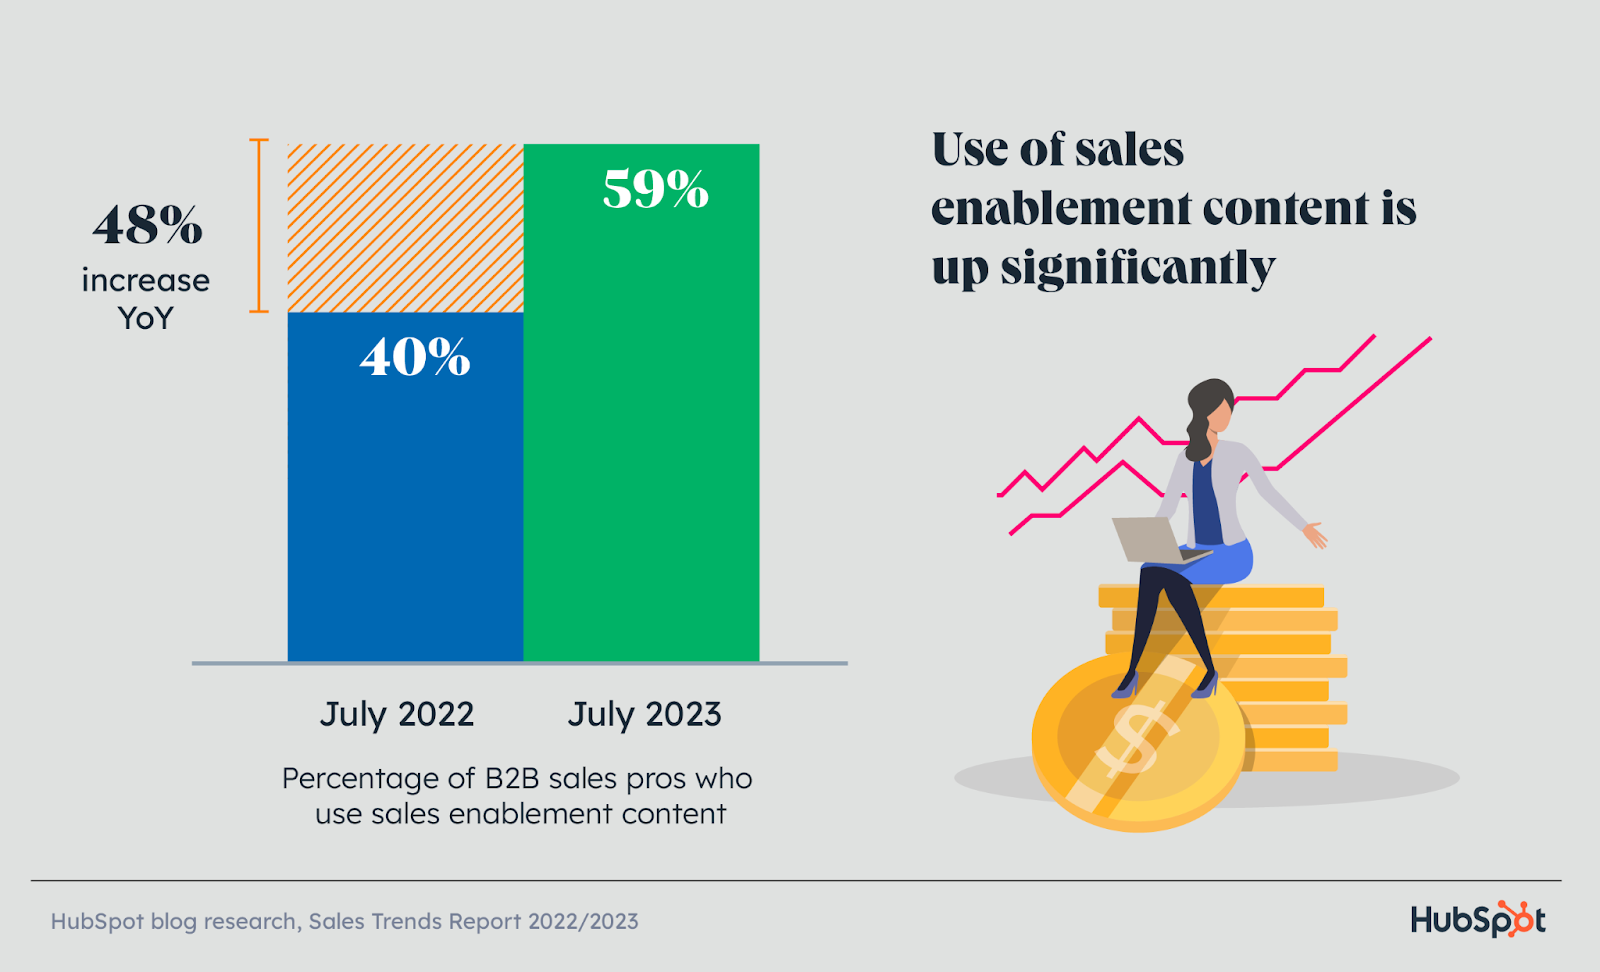 A chart showing the increase in the use of sales enablement content among U.S. professionals